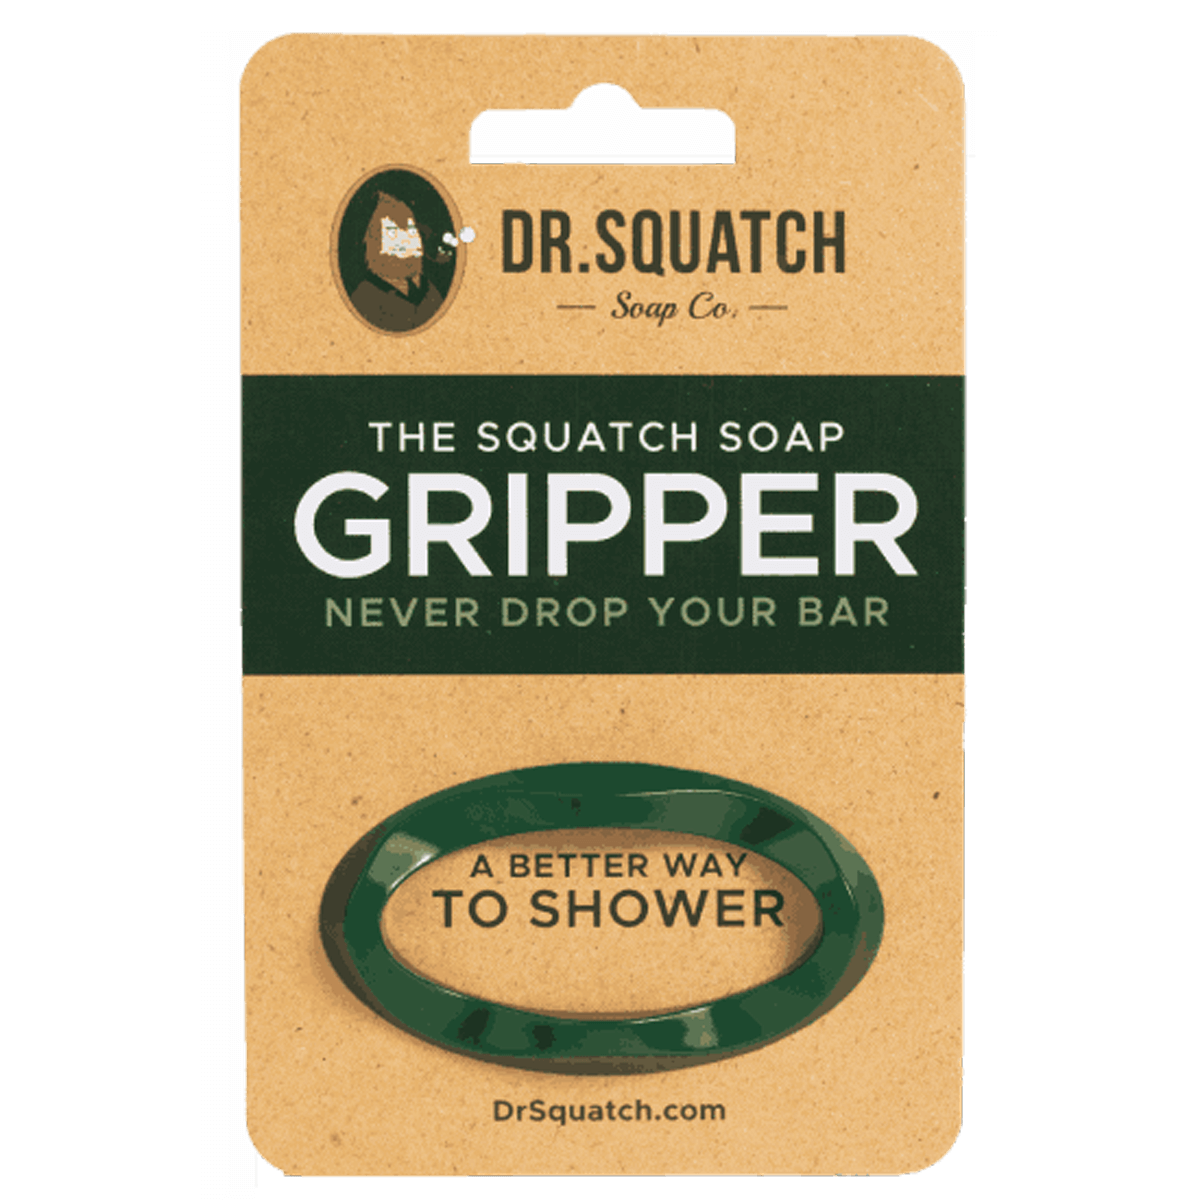 This is after ONE shower with alpine sage. A soap gripper AND a